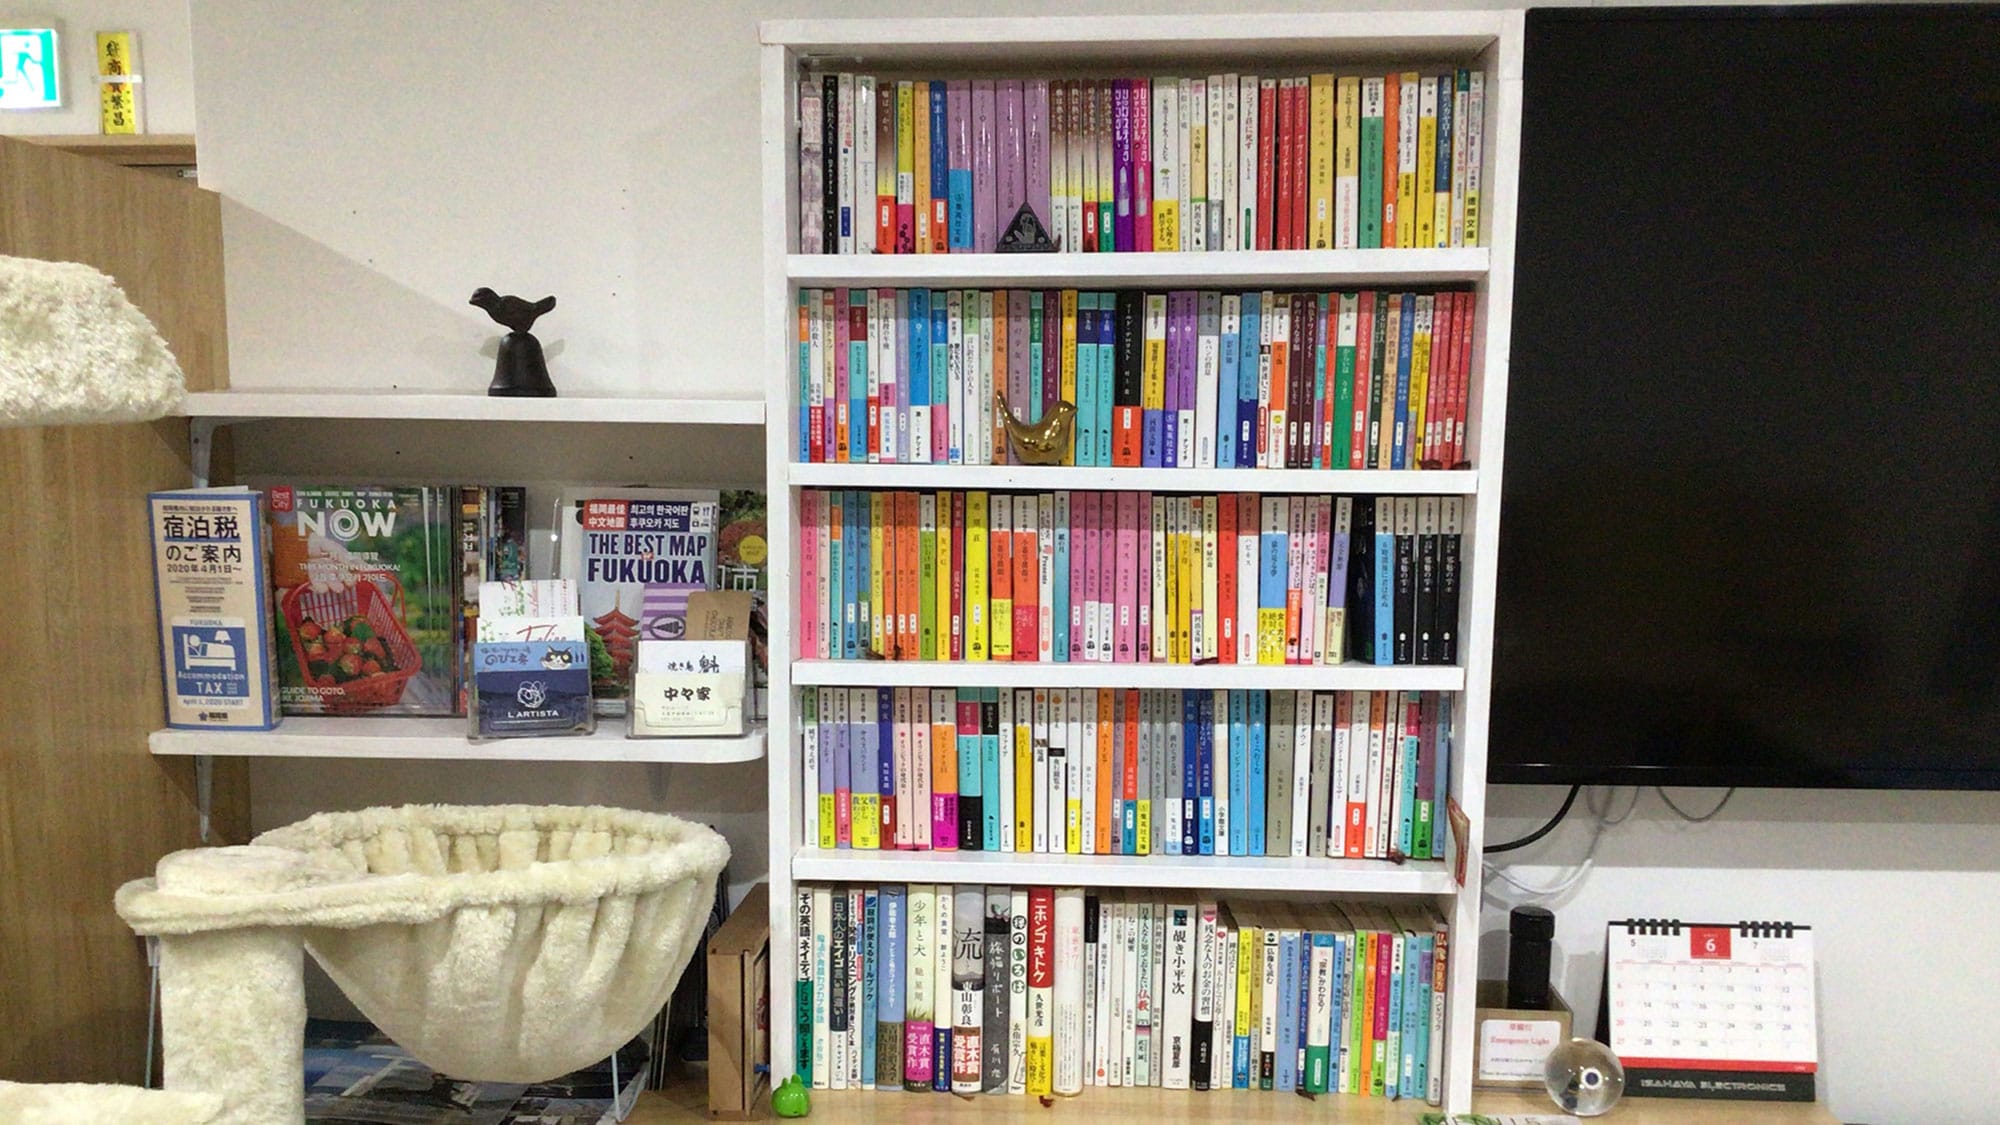 ・ Paperback books are also available in the shared space.